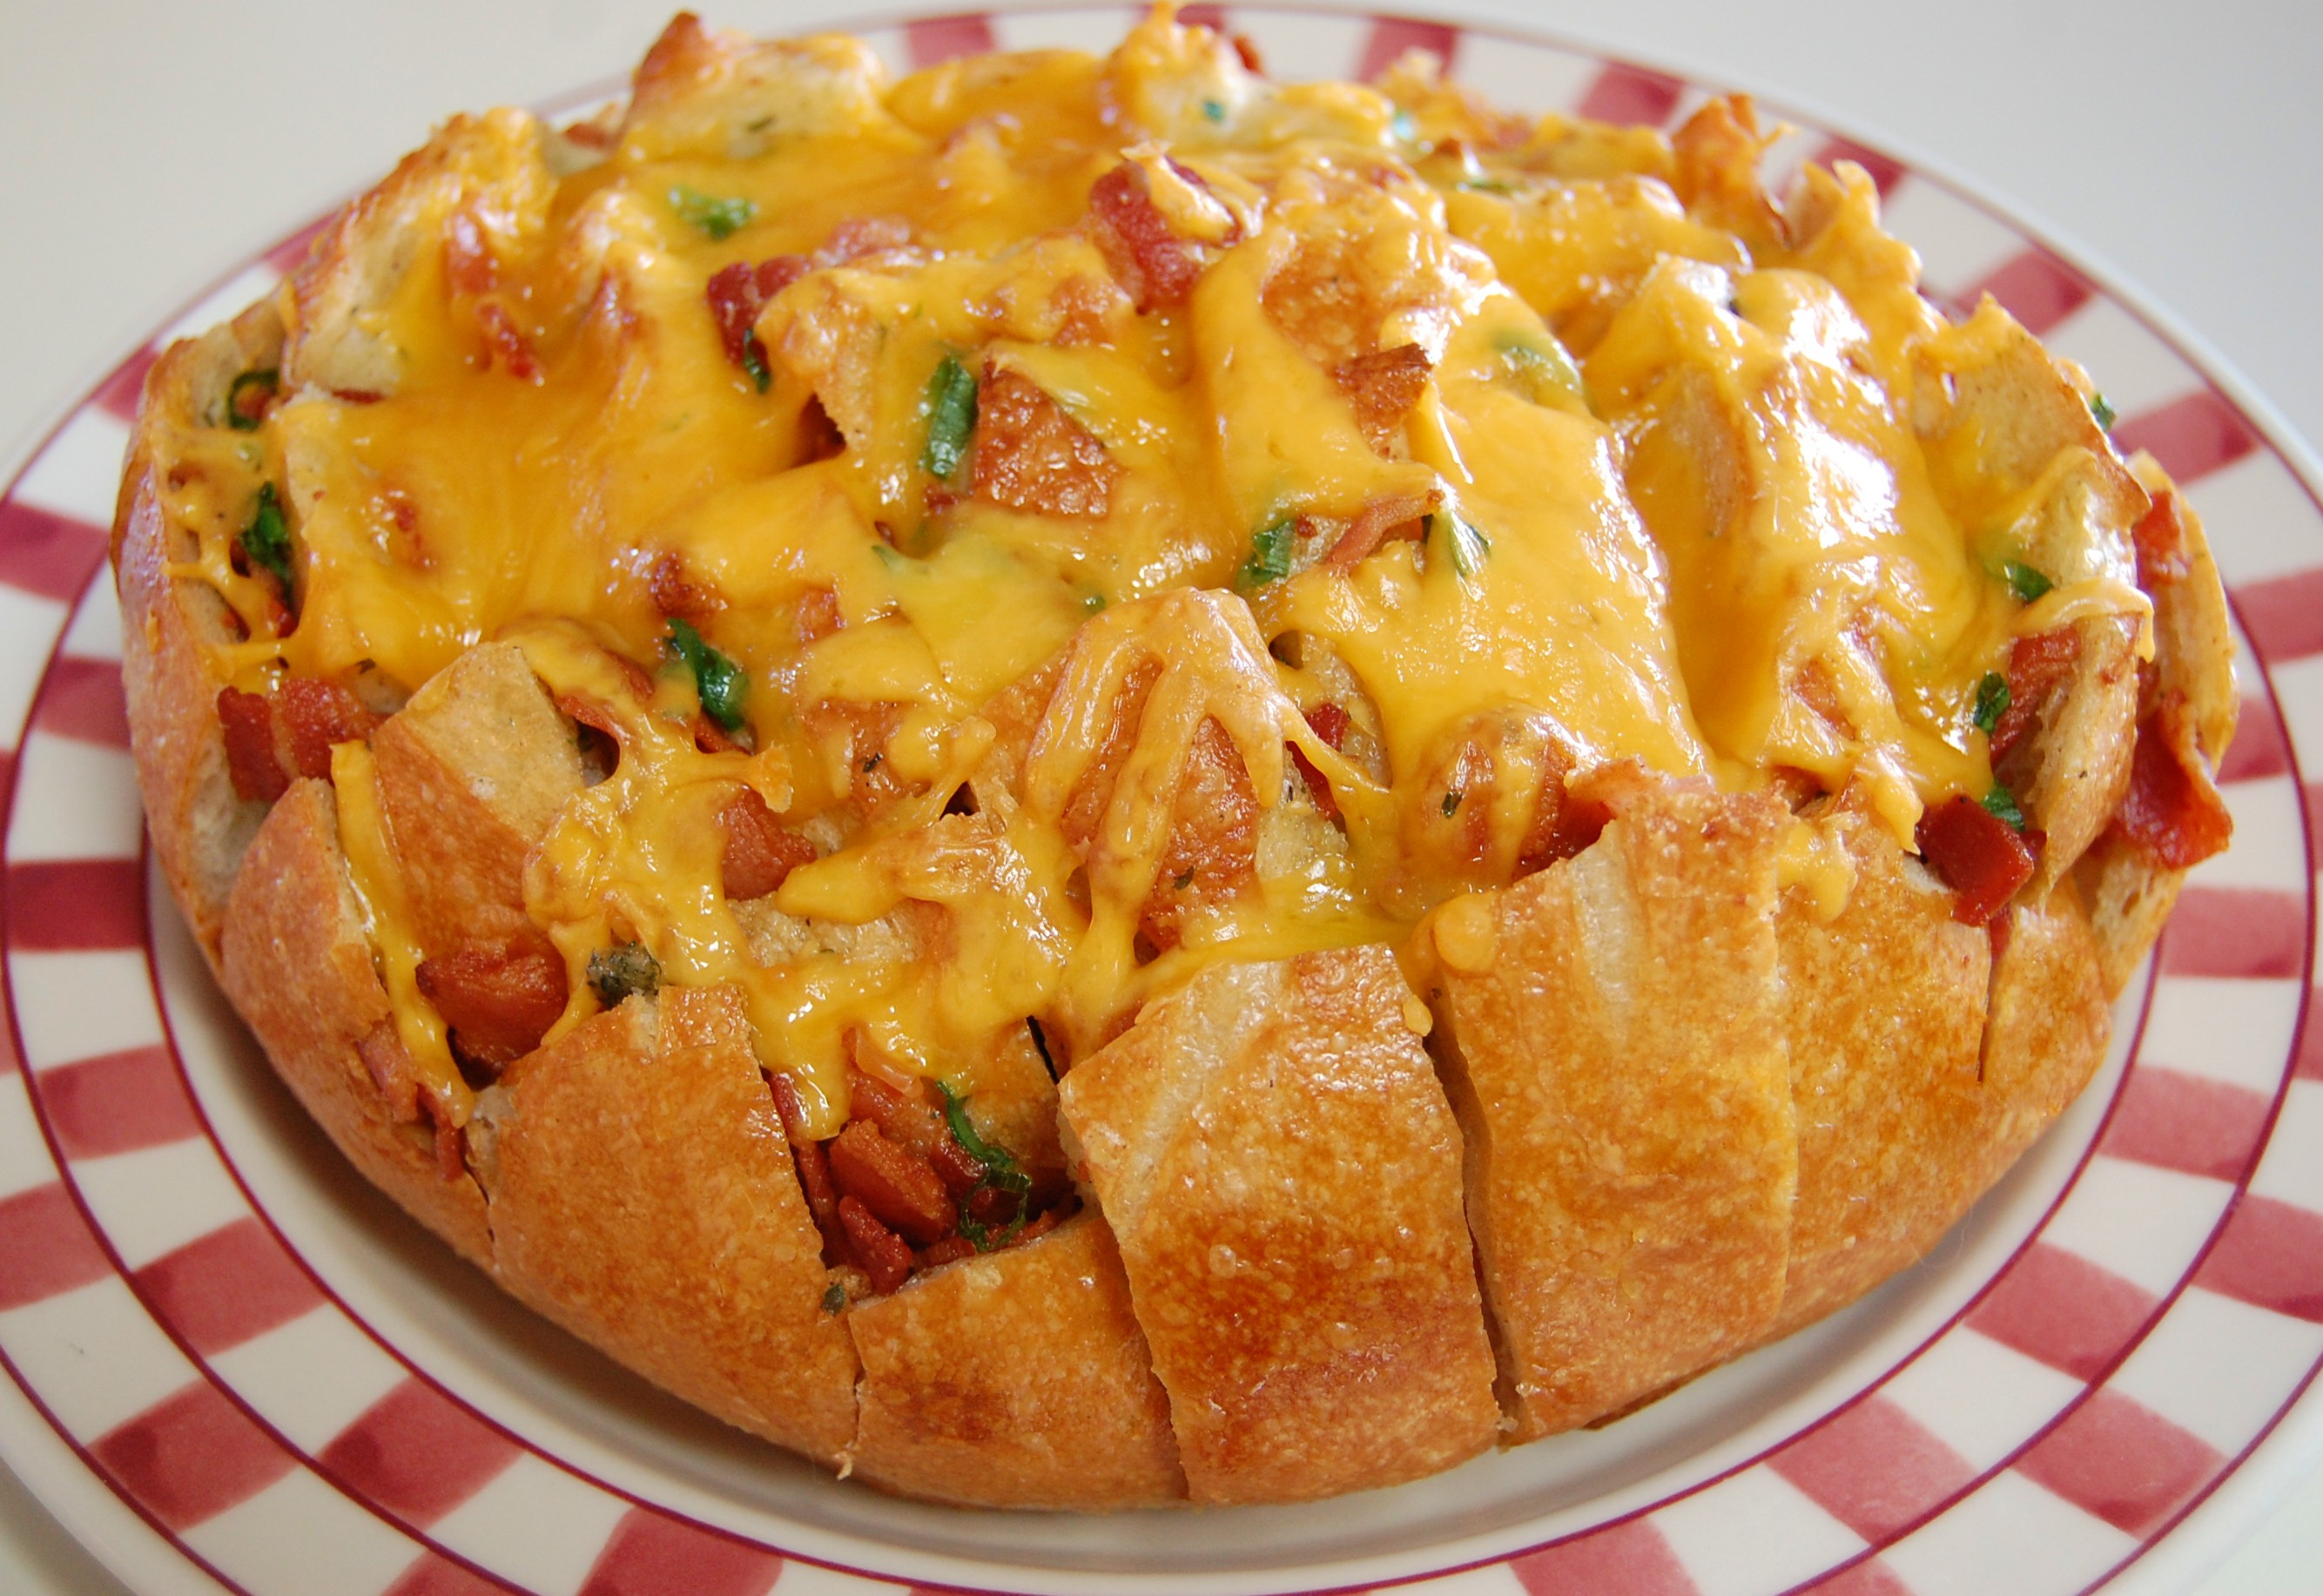 http://www.cookingmamas.com/wp-content/uploads/2014/10/Bacon-Cheddar-Chive-Pull-Apart-Bread.jpg